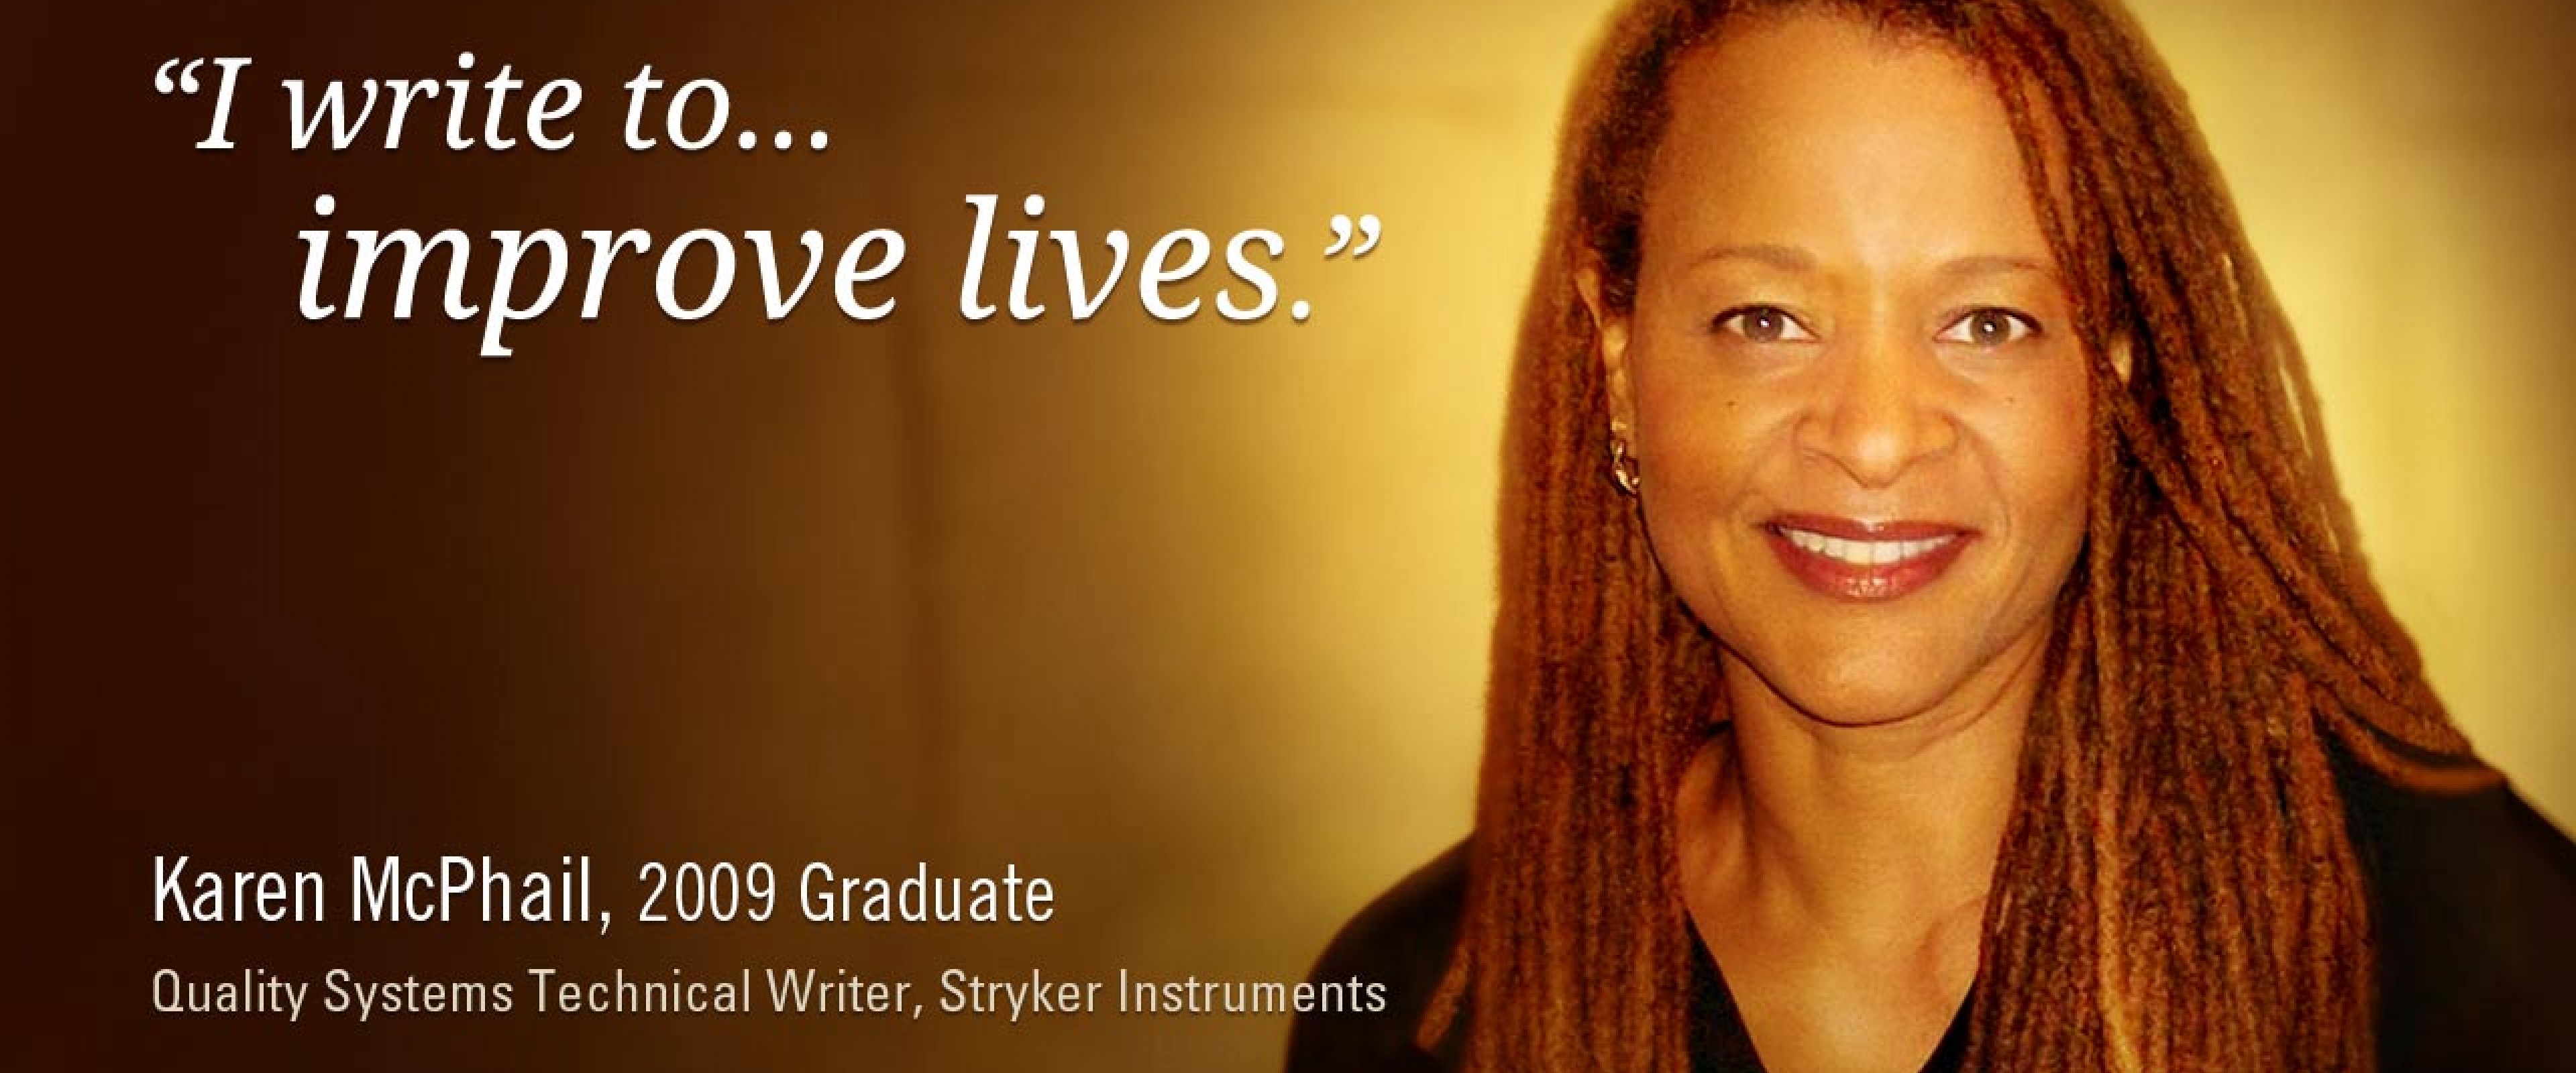 "I write to improve lives." -Karen McPhail, 2009 Graduate, Quality Systems Technical Writer, Stryker Instruments